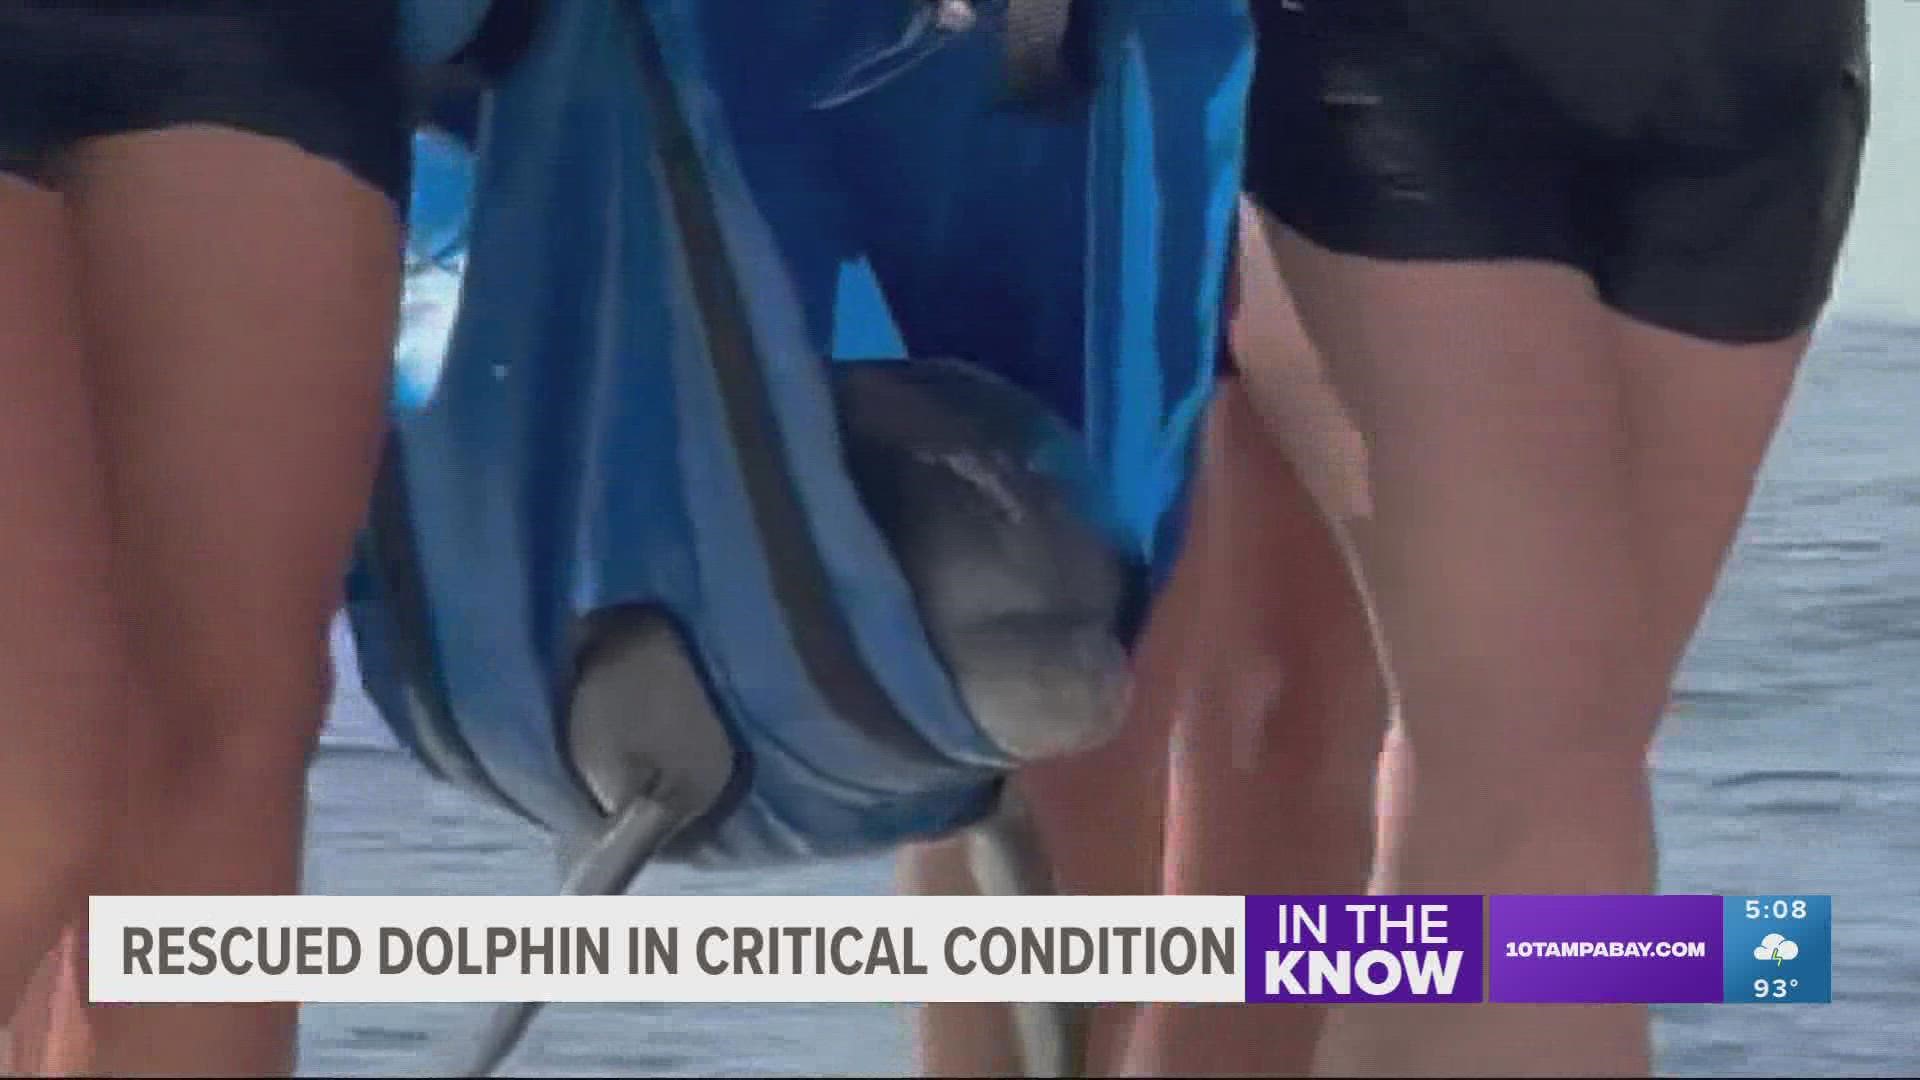 In an update Thursday, SeaWorld Orlando says the male dolphin is receiving around-the-clock care at its facility.